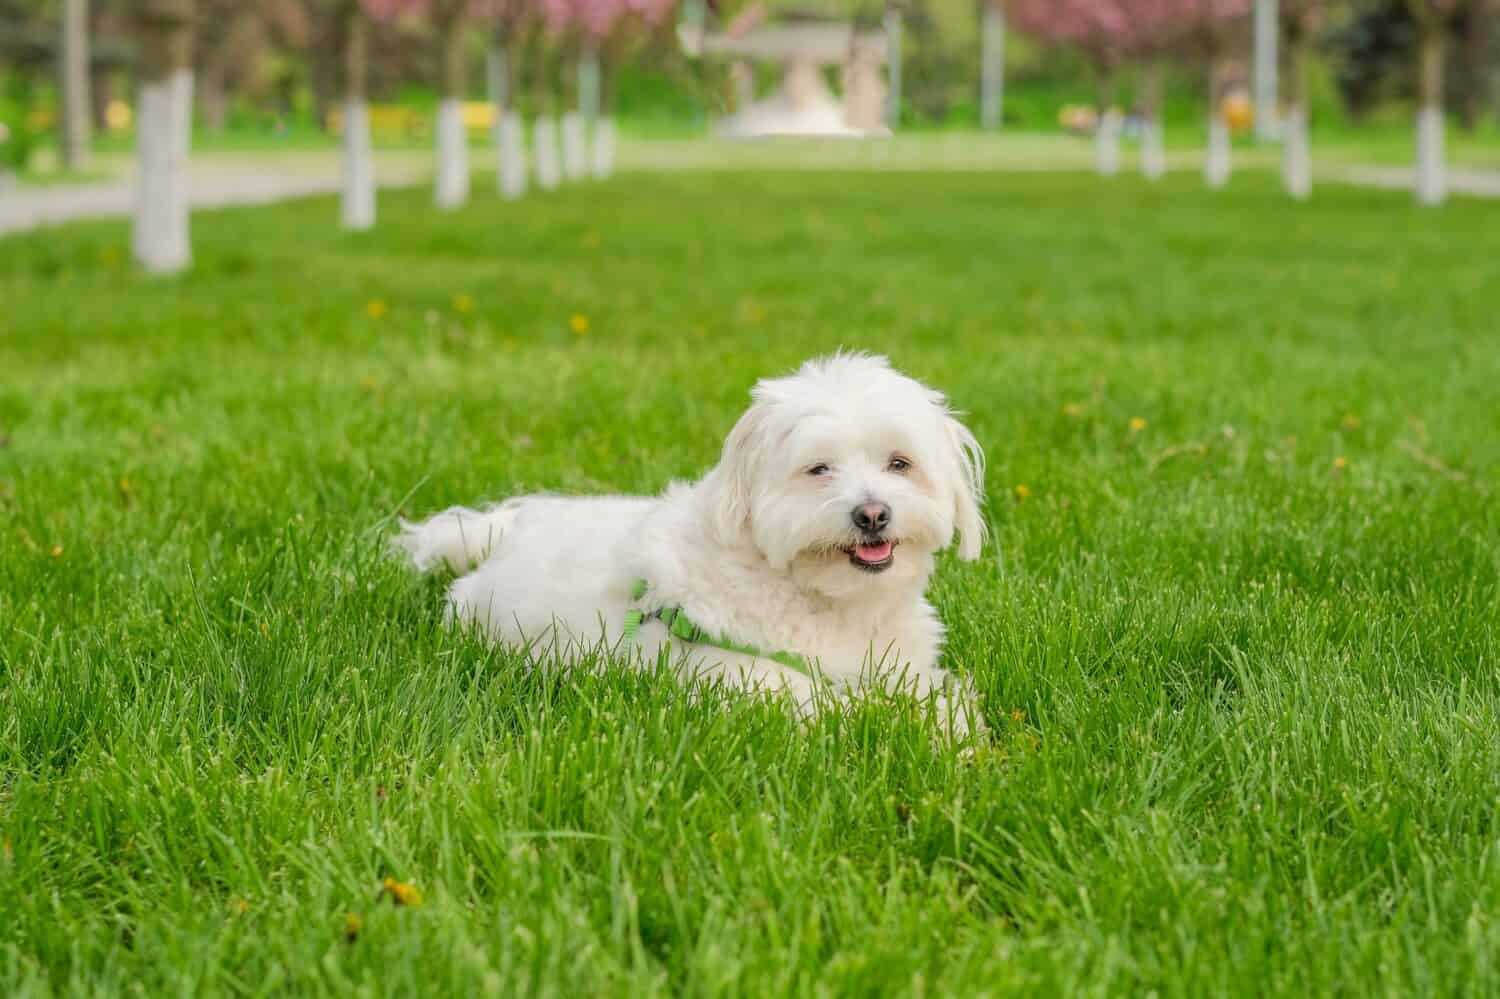 Maltese dog lies on the grass in the park